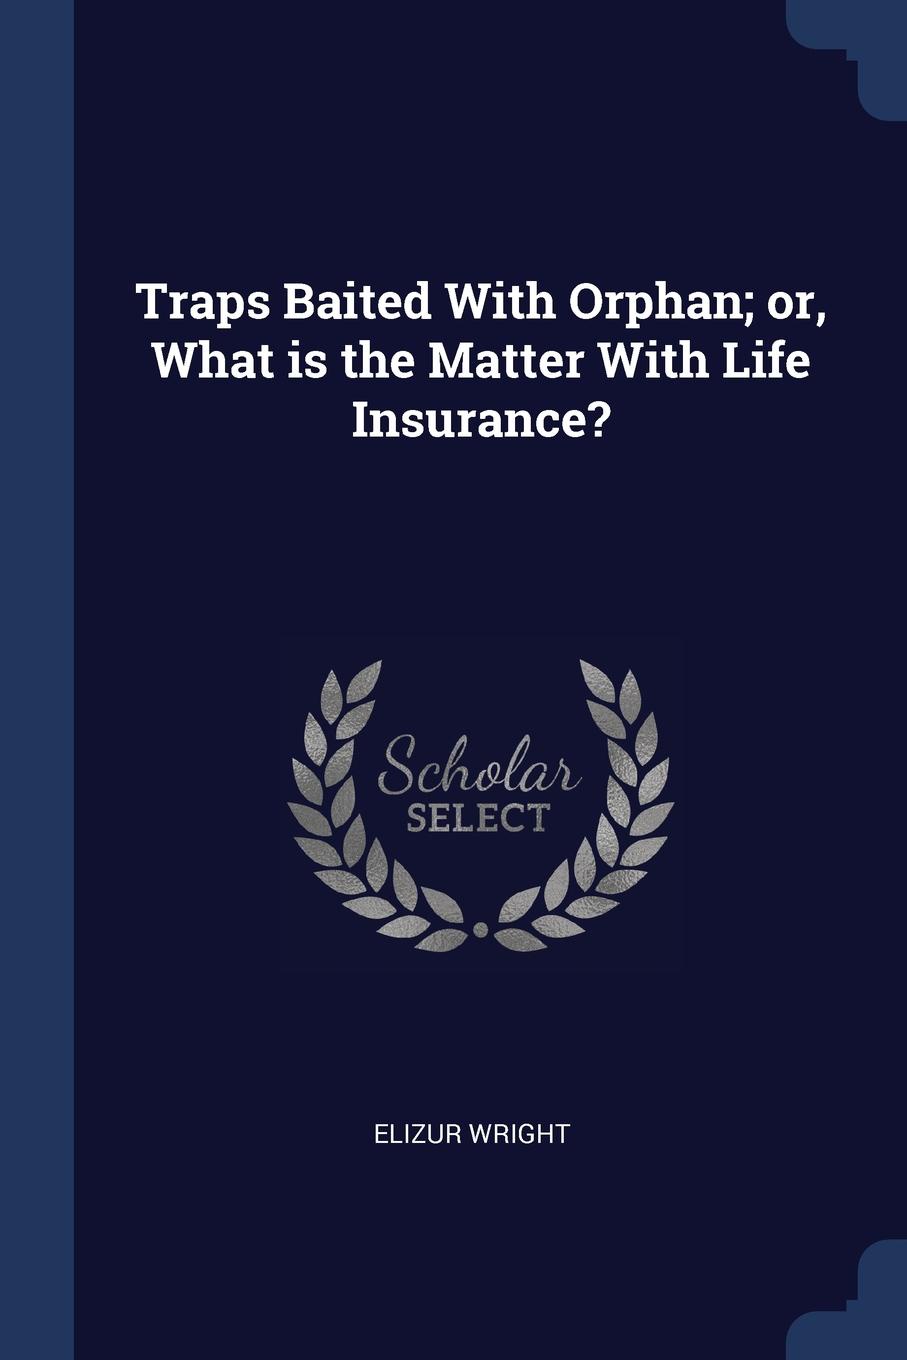 Traps Baited With Orphan; or, What is the Matter With Life Insurance.